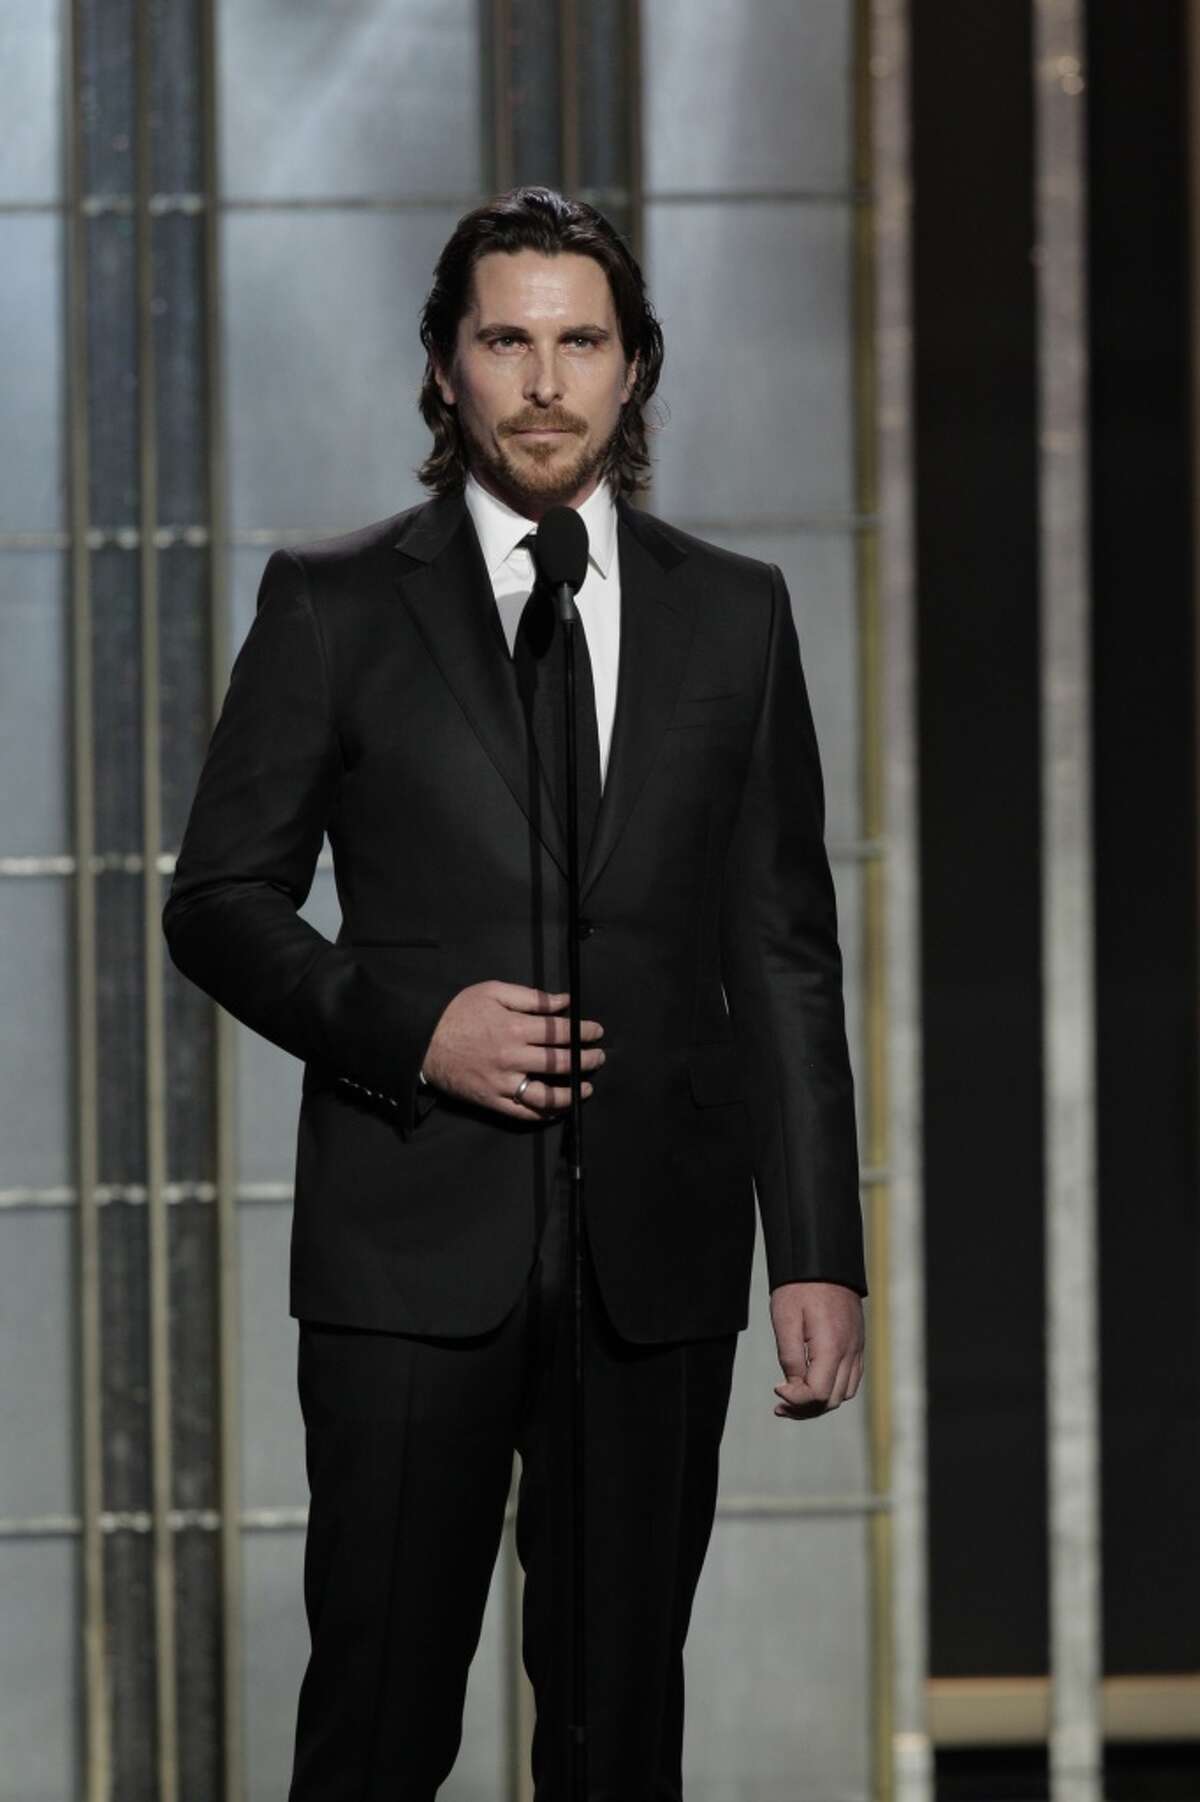 Christian Bale gained over 40 pounds for his role as Dick Cheney in the film "Backseat"